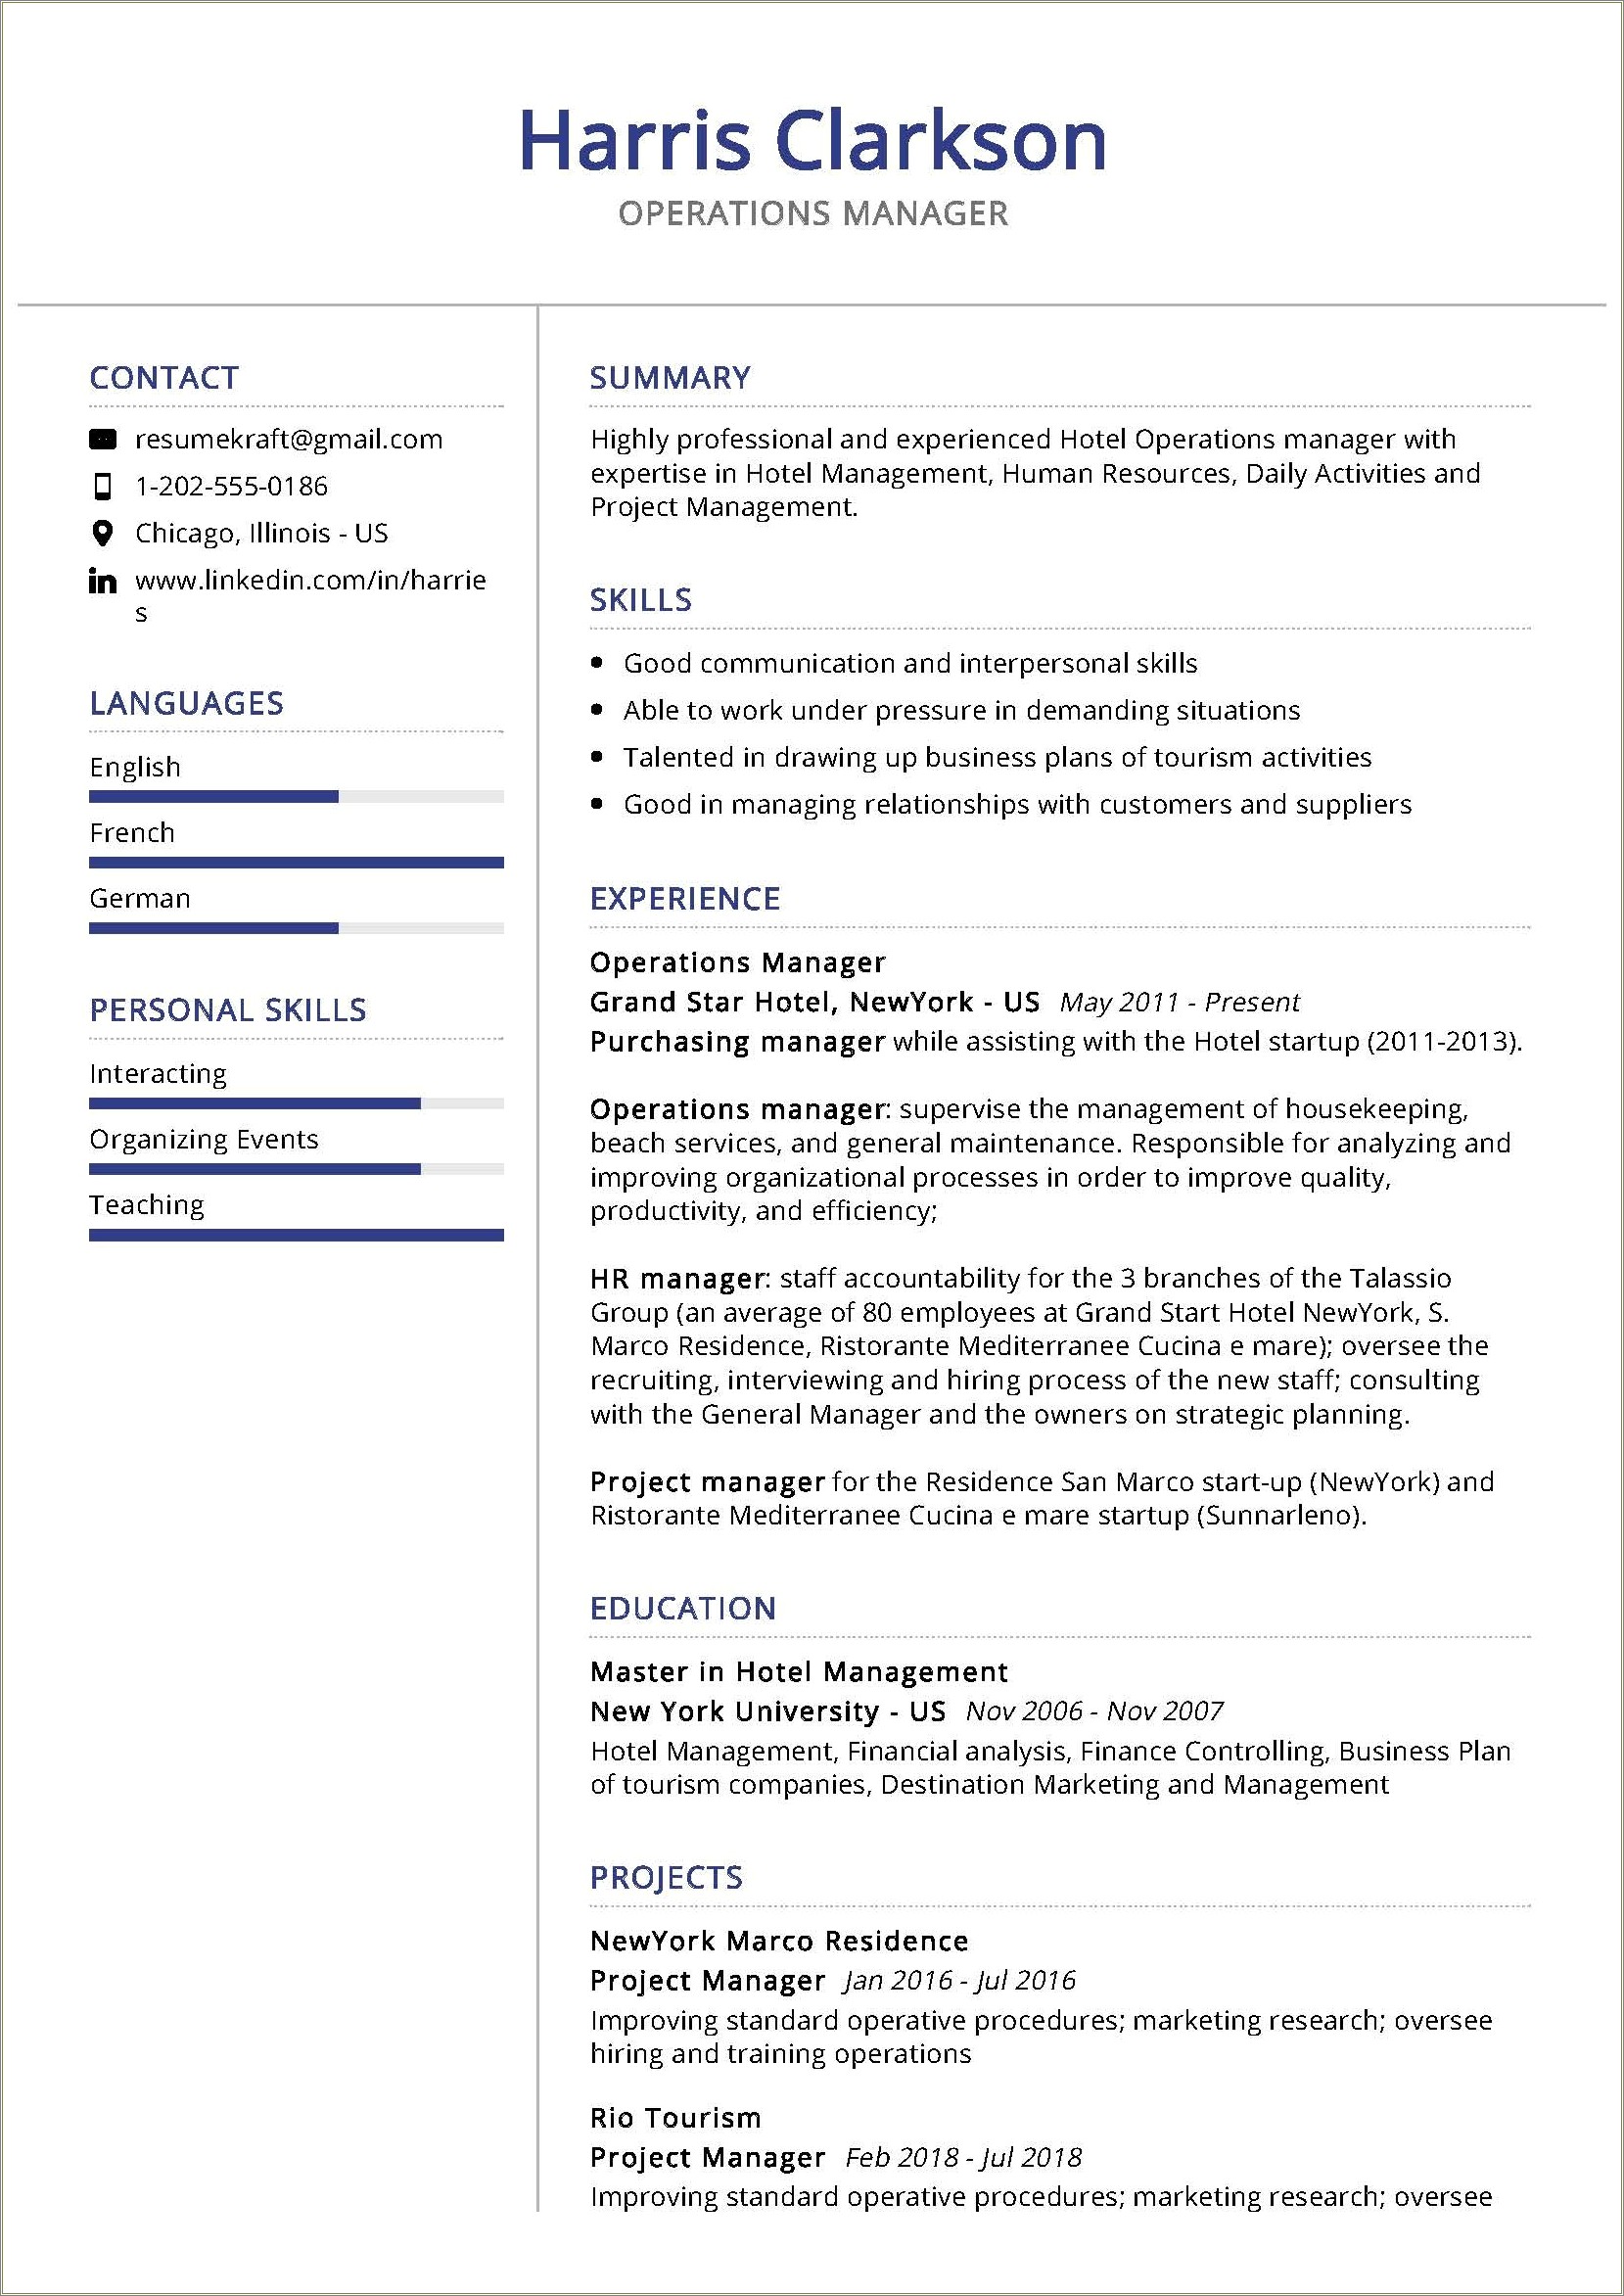 Federal Resume Best Fonts Human Resources